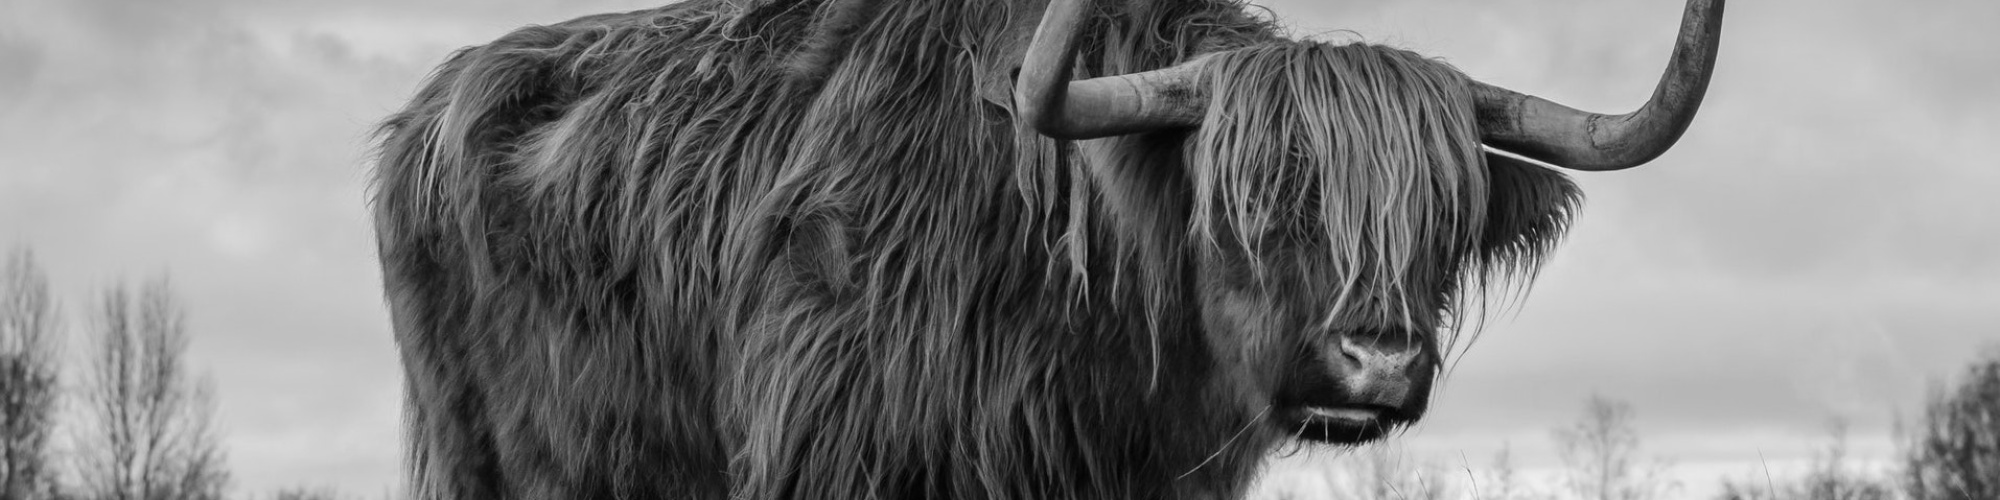 A scottish highland cow with large horns in black and white